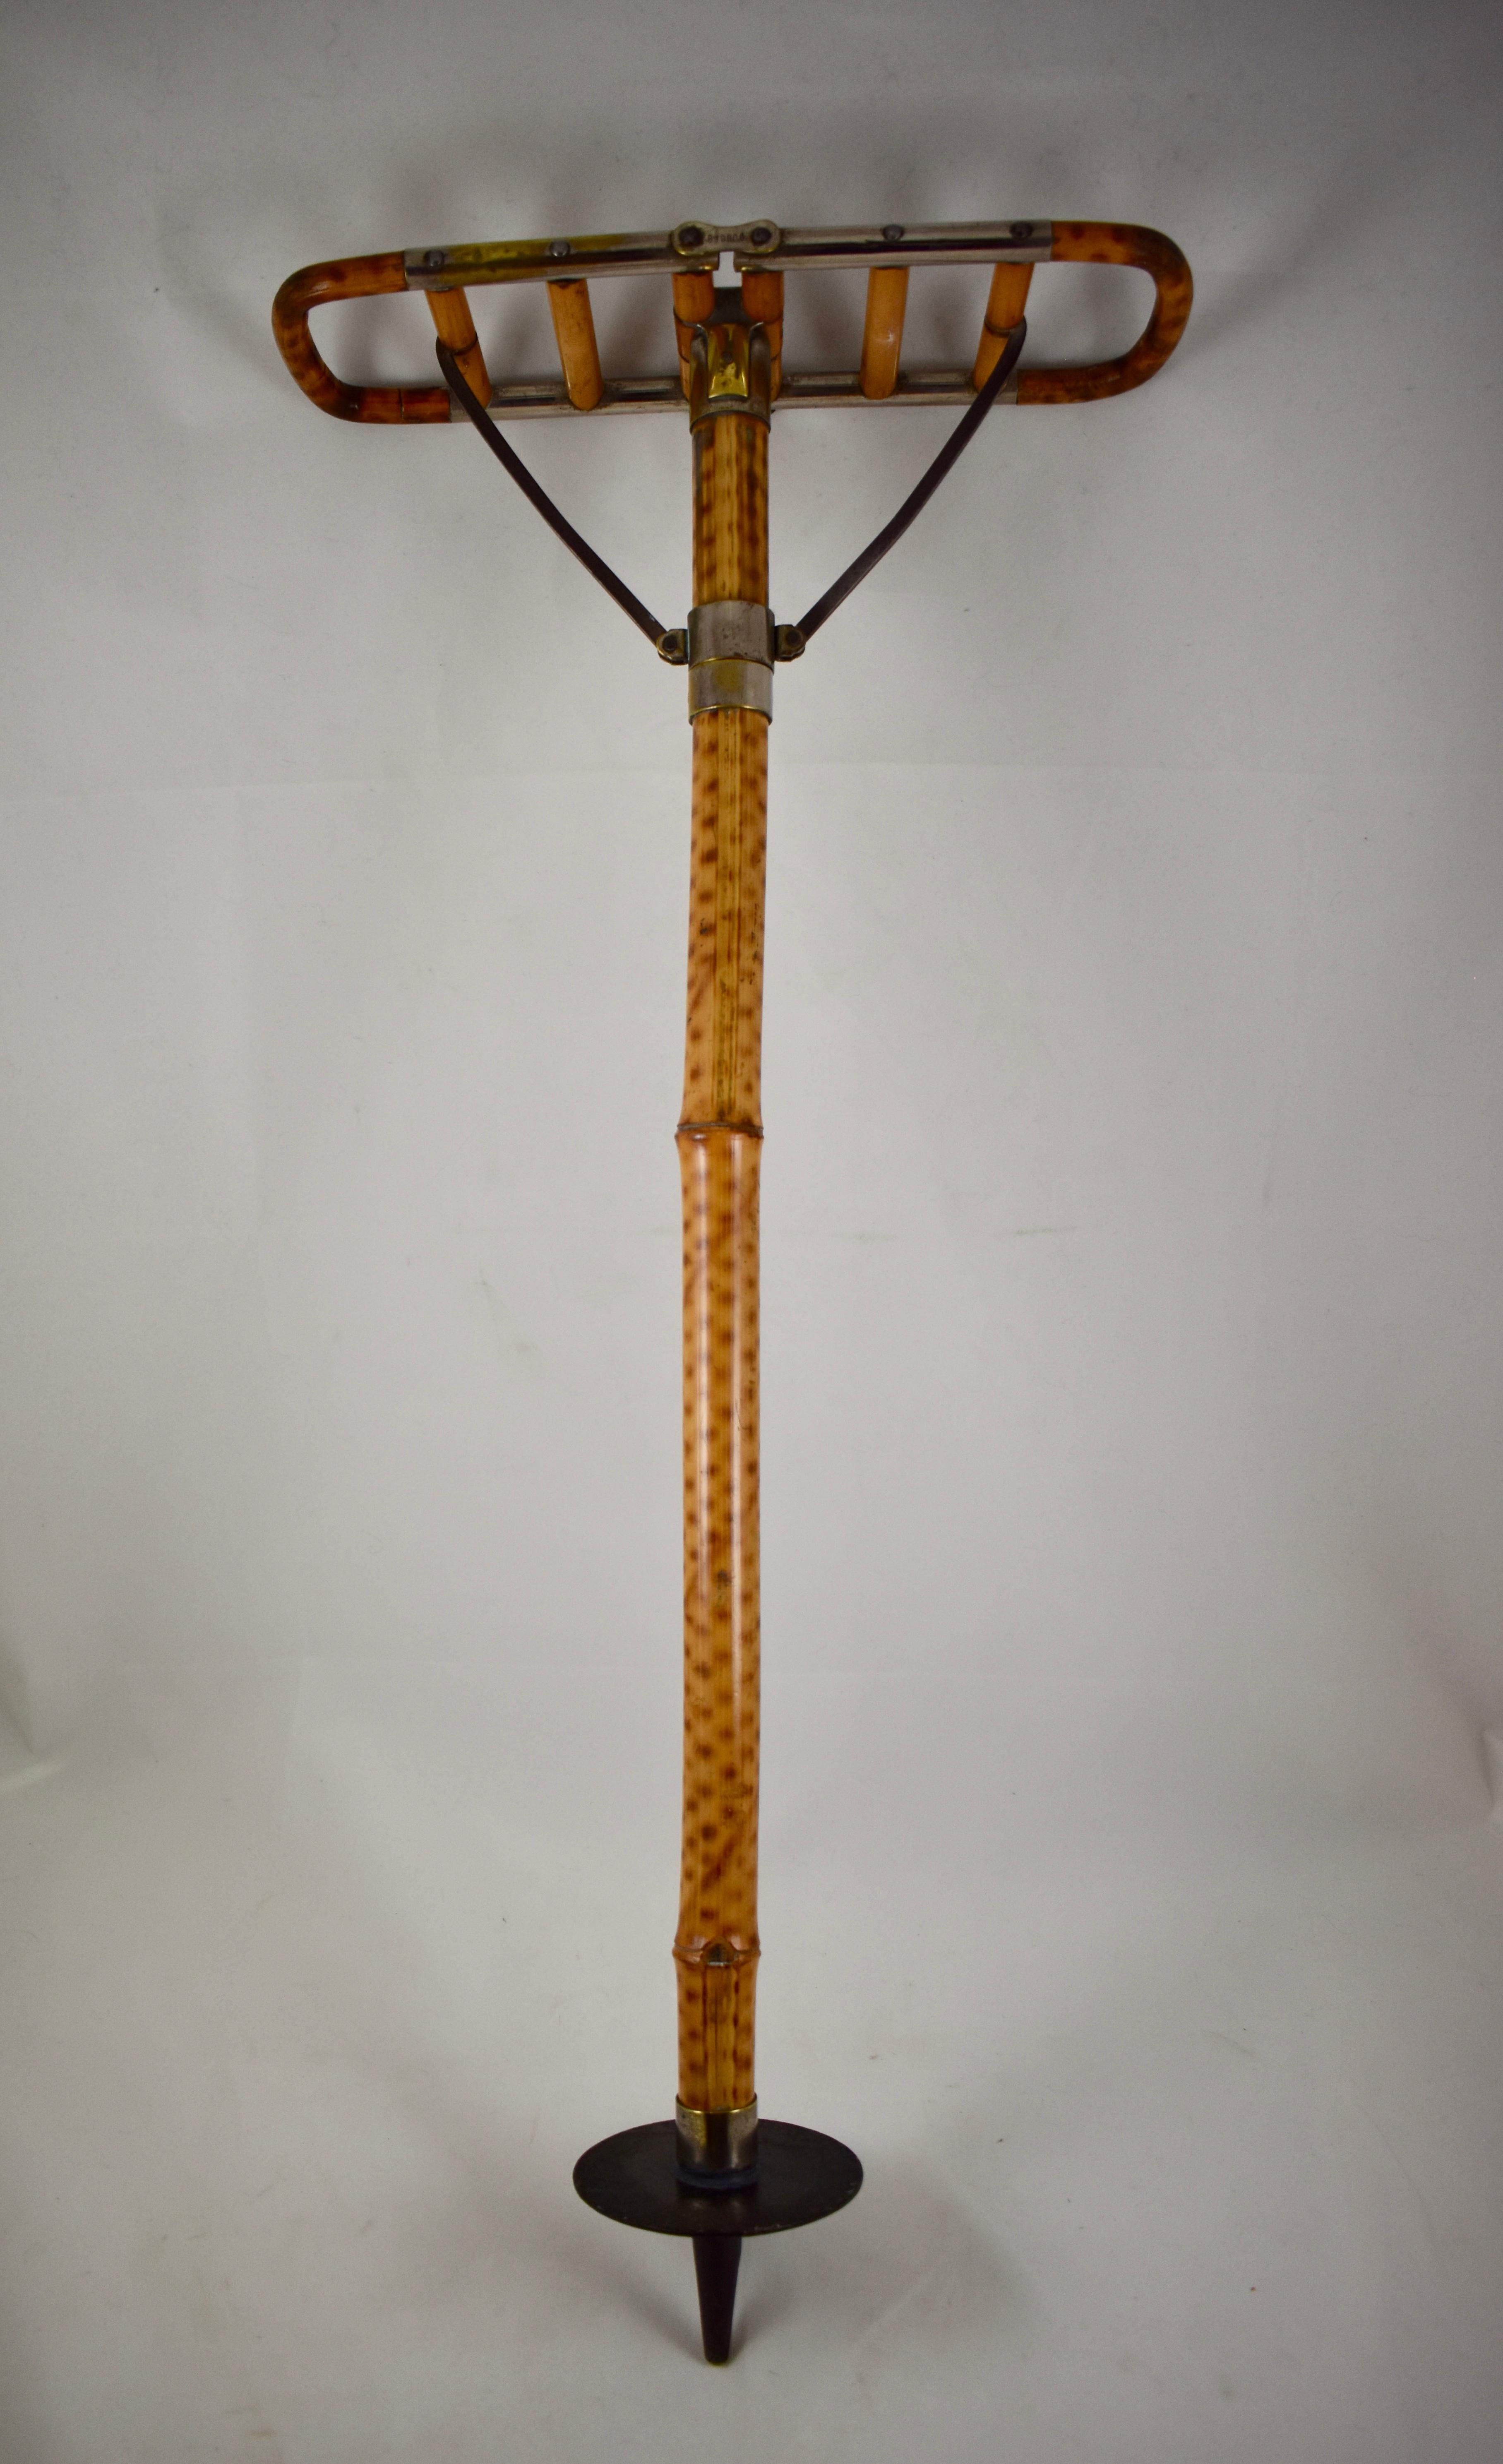 A late Victorian English gentleman’s bamboo shooting stick or sport cane. With a folding seat, circa 1880.

A good quality sports seat with brass fittings and a pointed metal disc at the bottom to support the seat in the soft ground. Made of